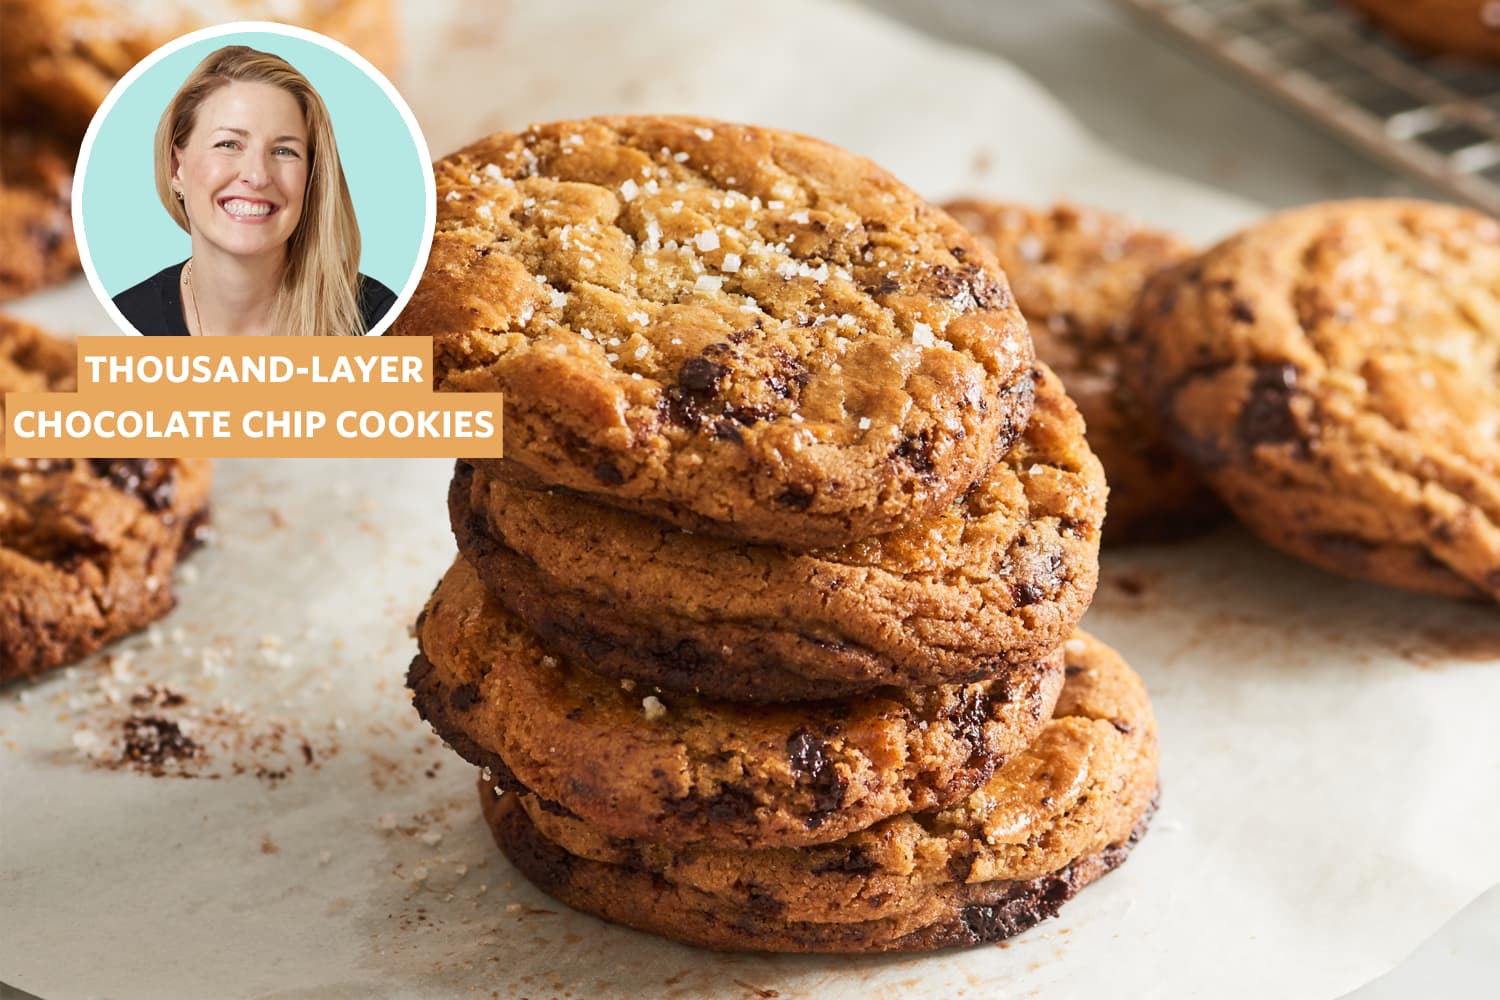 I Tried Sarah Copeland's Thousand-Layer Chocolate Chip Cookies | Kitchn